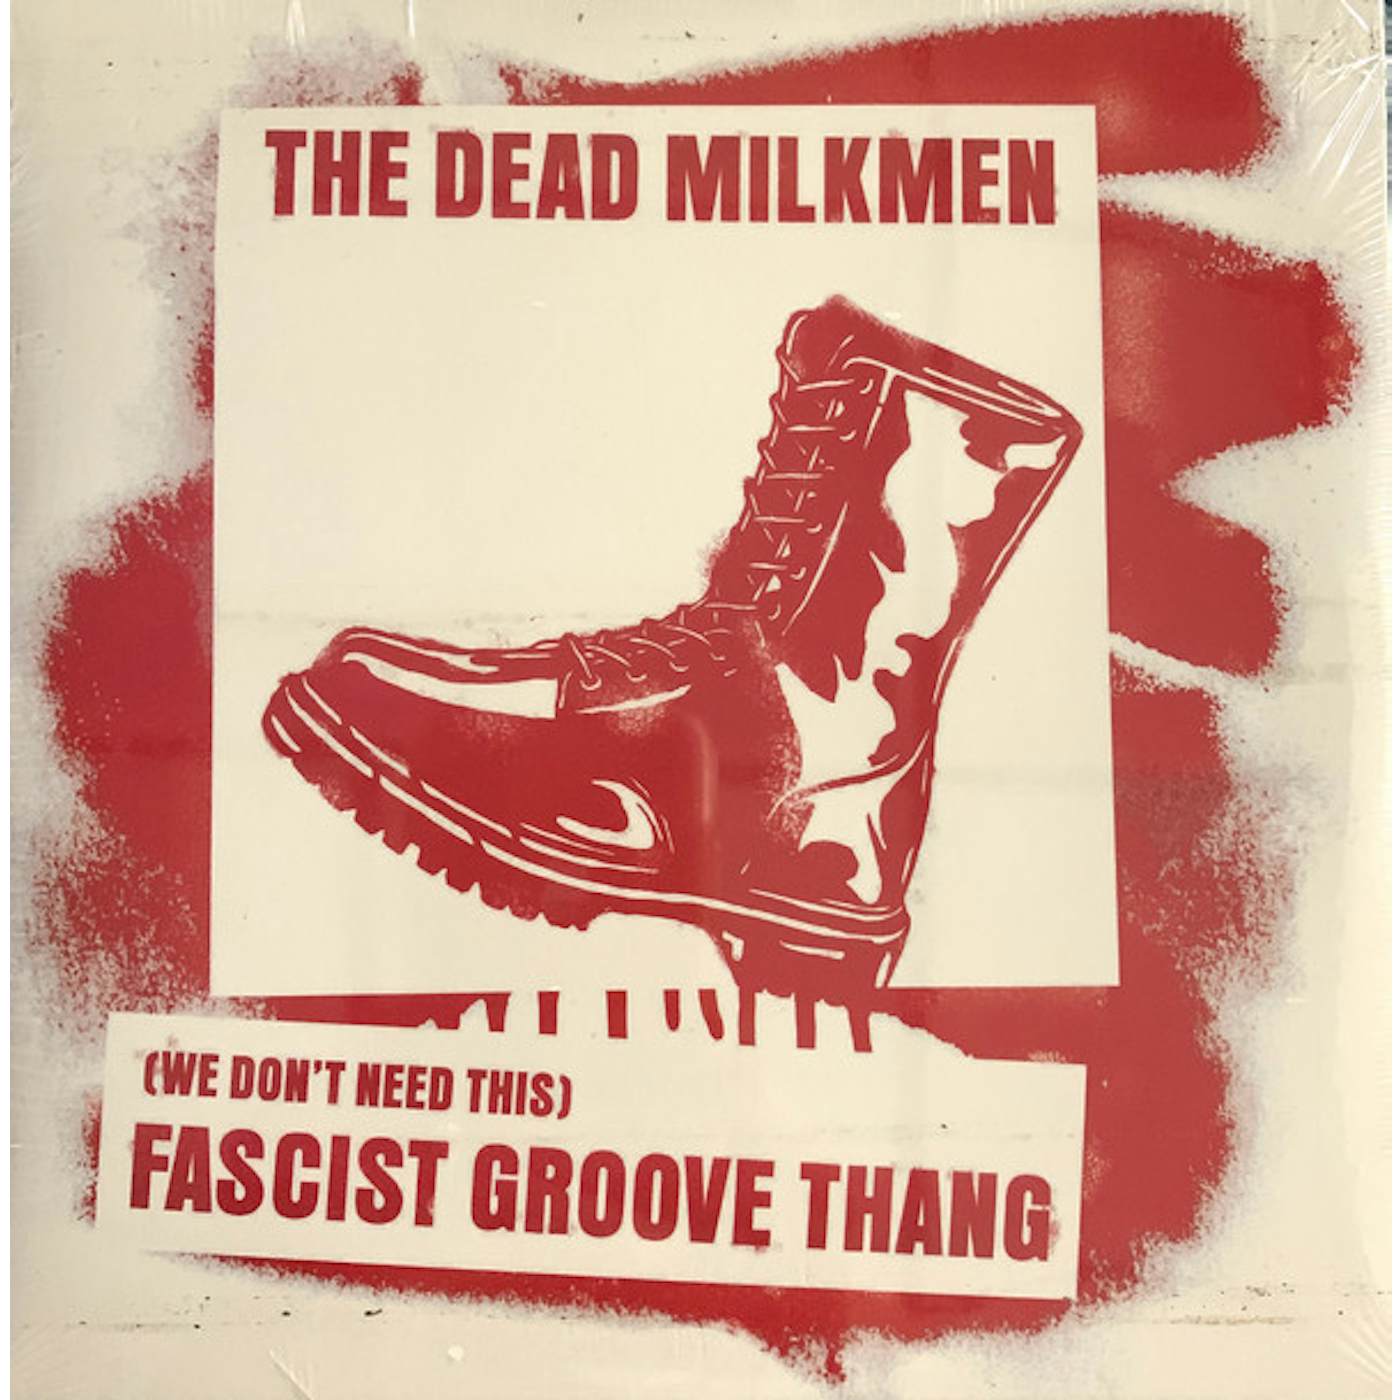 The Dead Milkmen (WE DON'T NEED THIS) FASCIST GROOVE THANG Vinyl Record